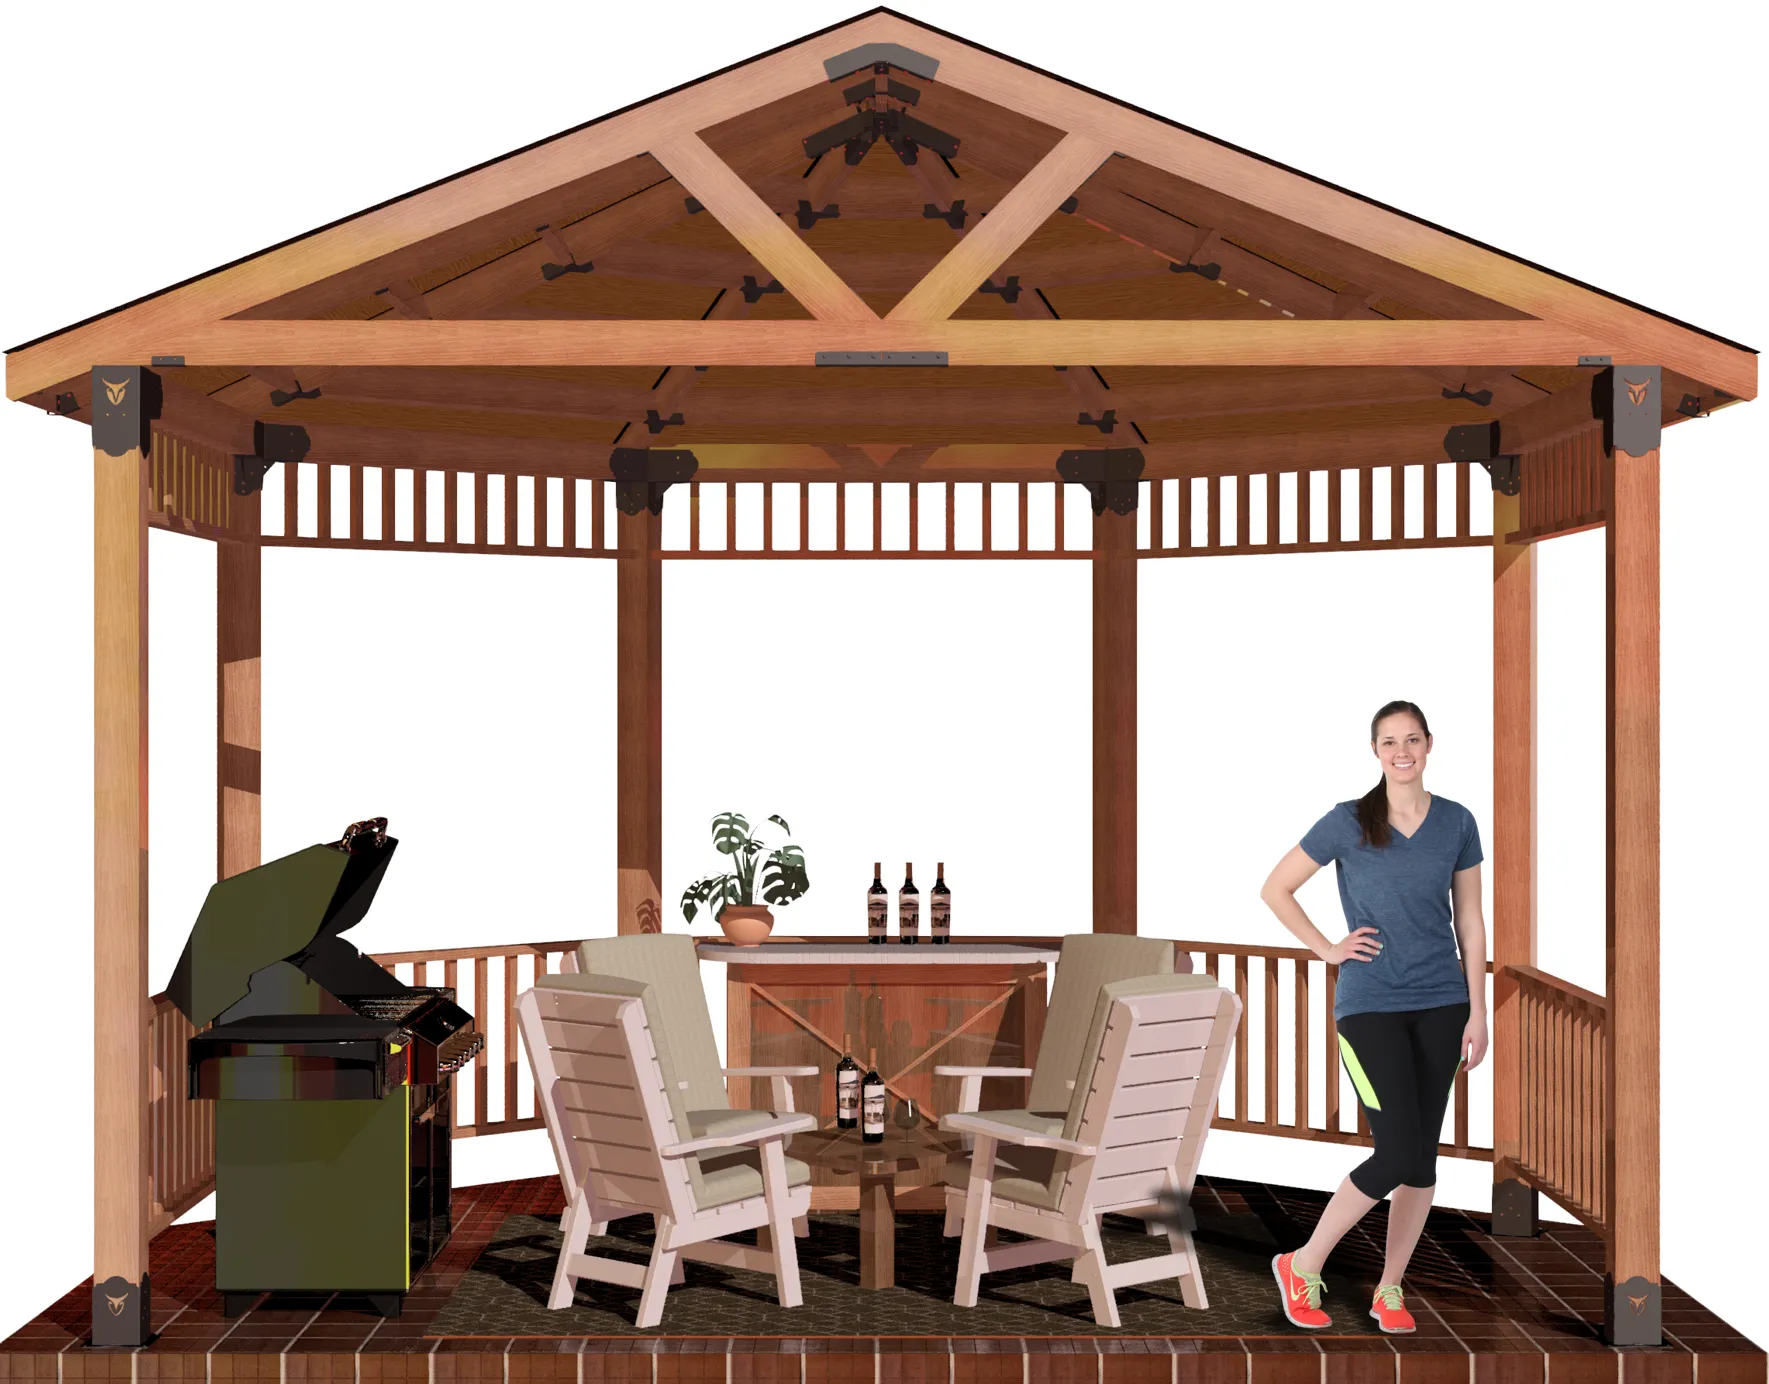 DIY 6x6, Surface Mounted, Partial Octagon Gazebo with barbecuer,bar, and casual seating furniture. A girl standing inside and smiling.